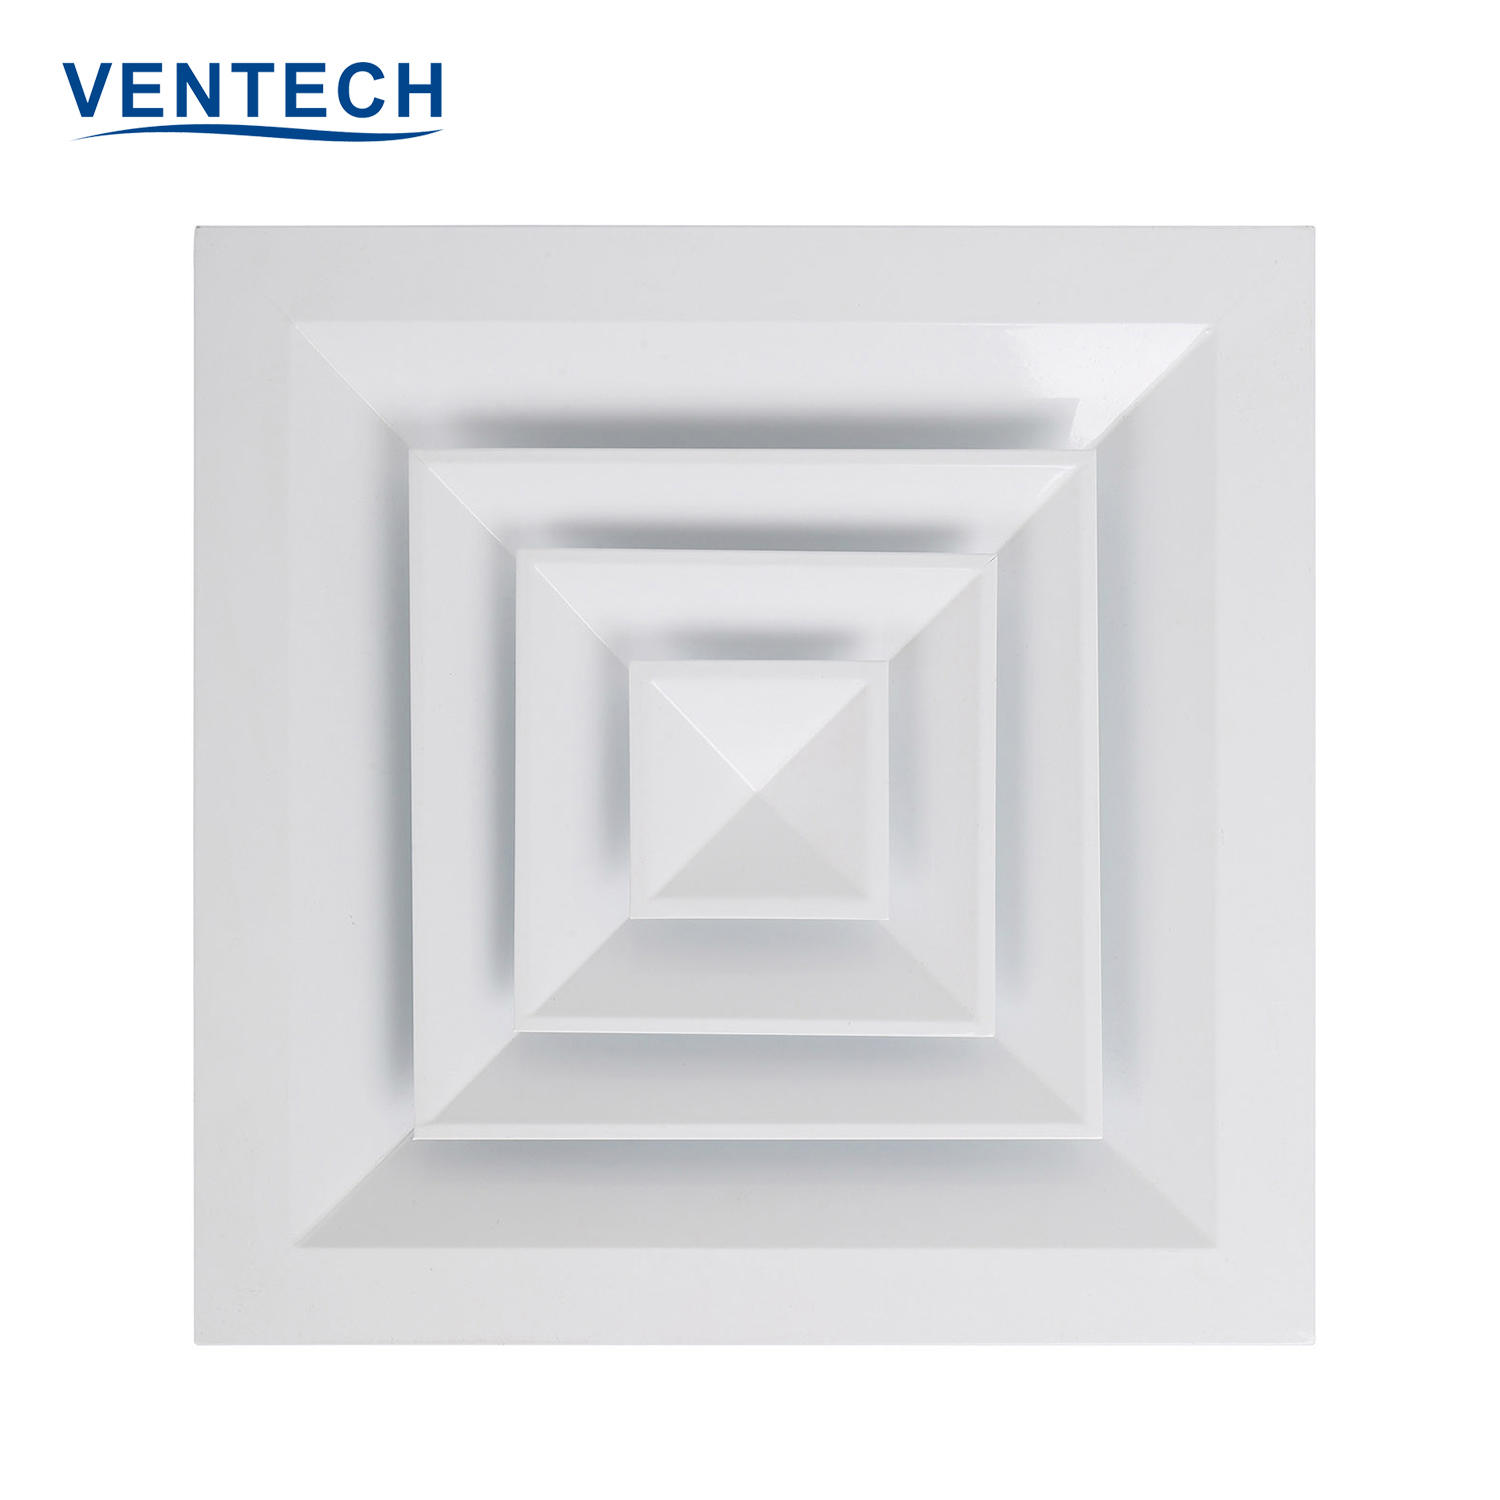 High Quality Hvac VENTECH Aluminum Exhaust Air Conditioning Duct Square Ceiling Diffuser